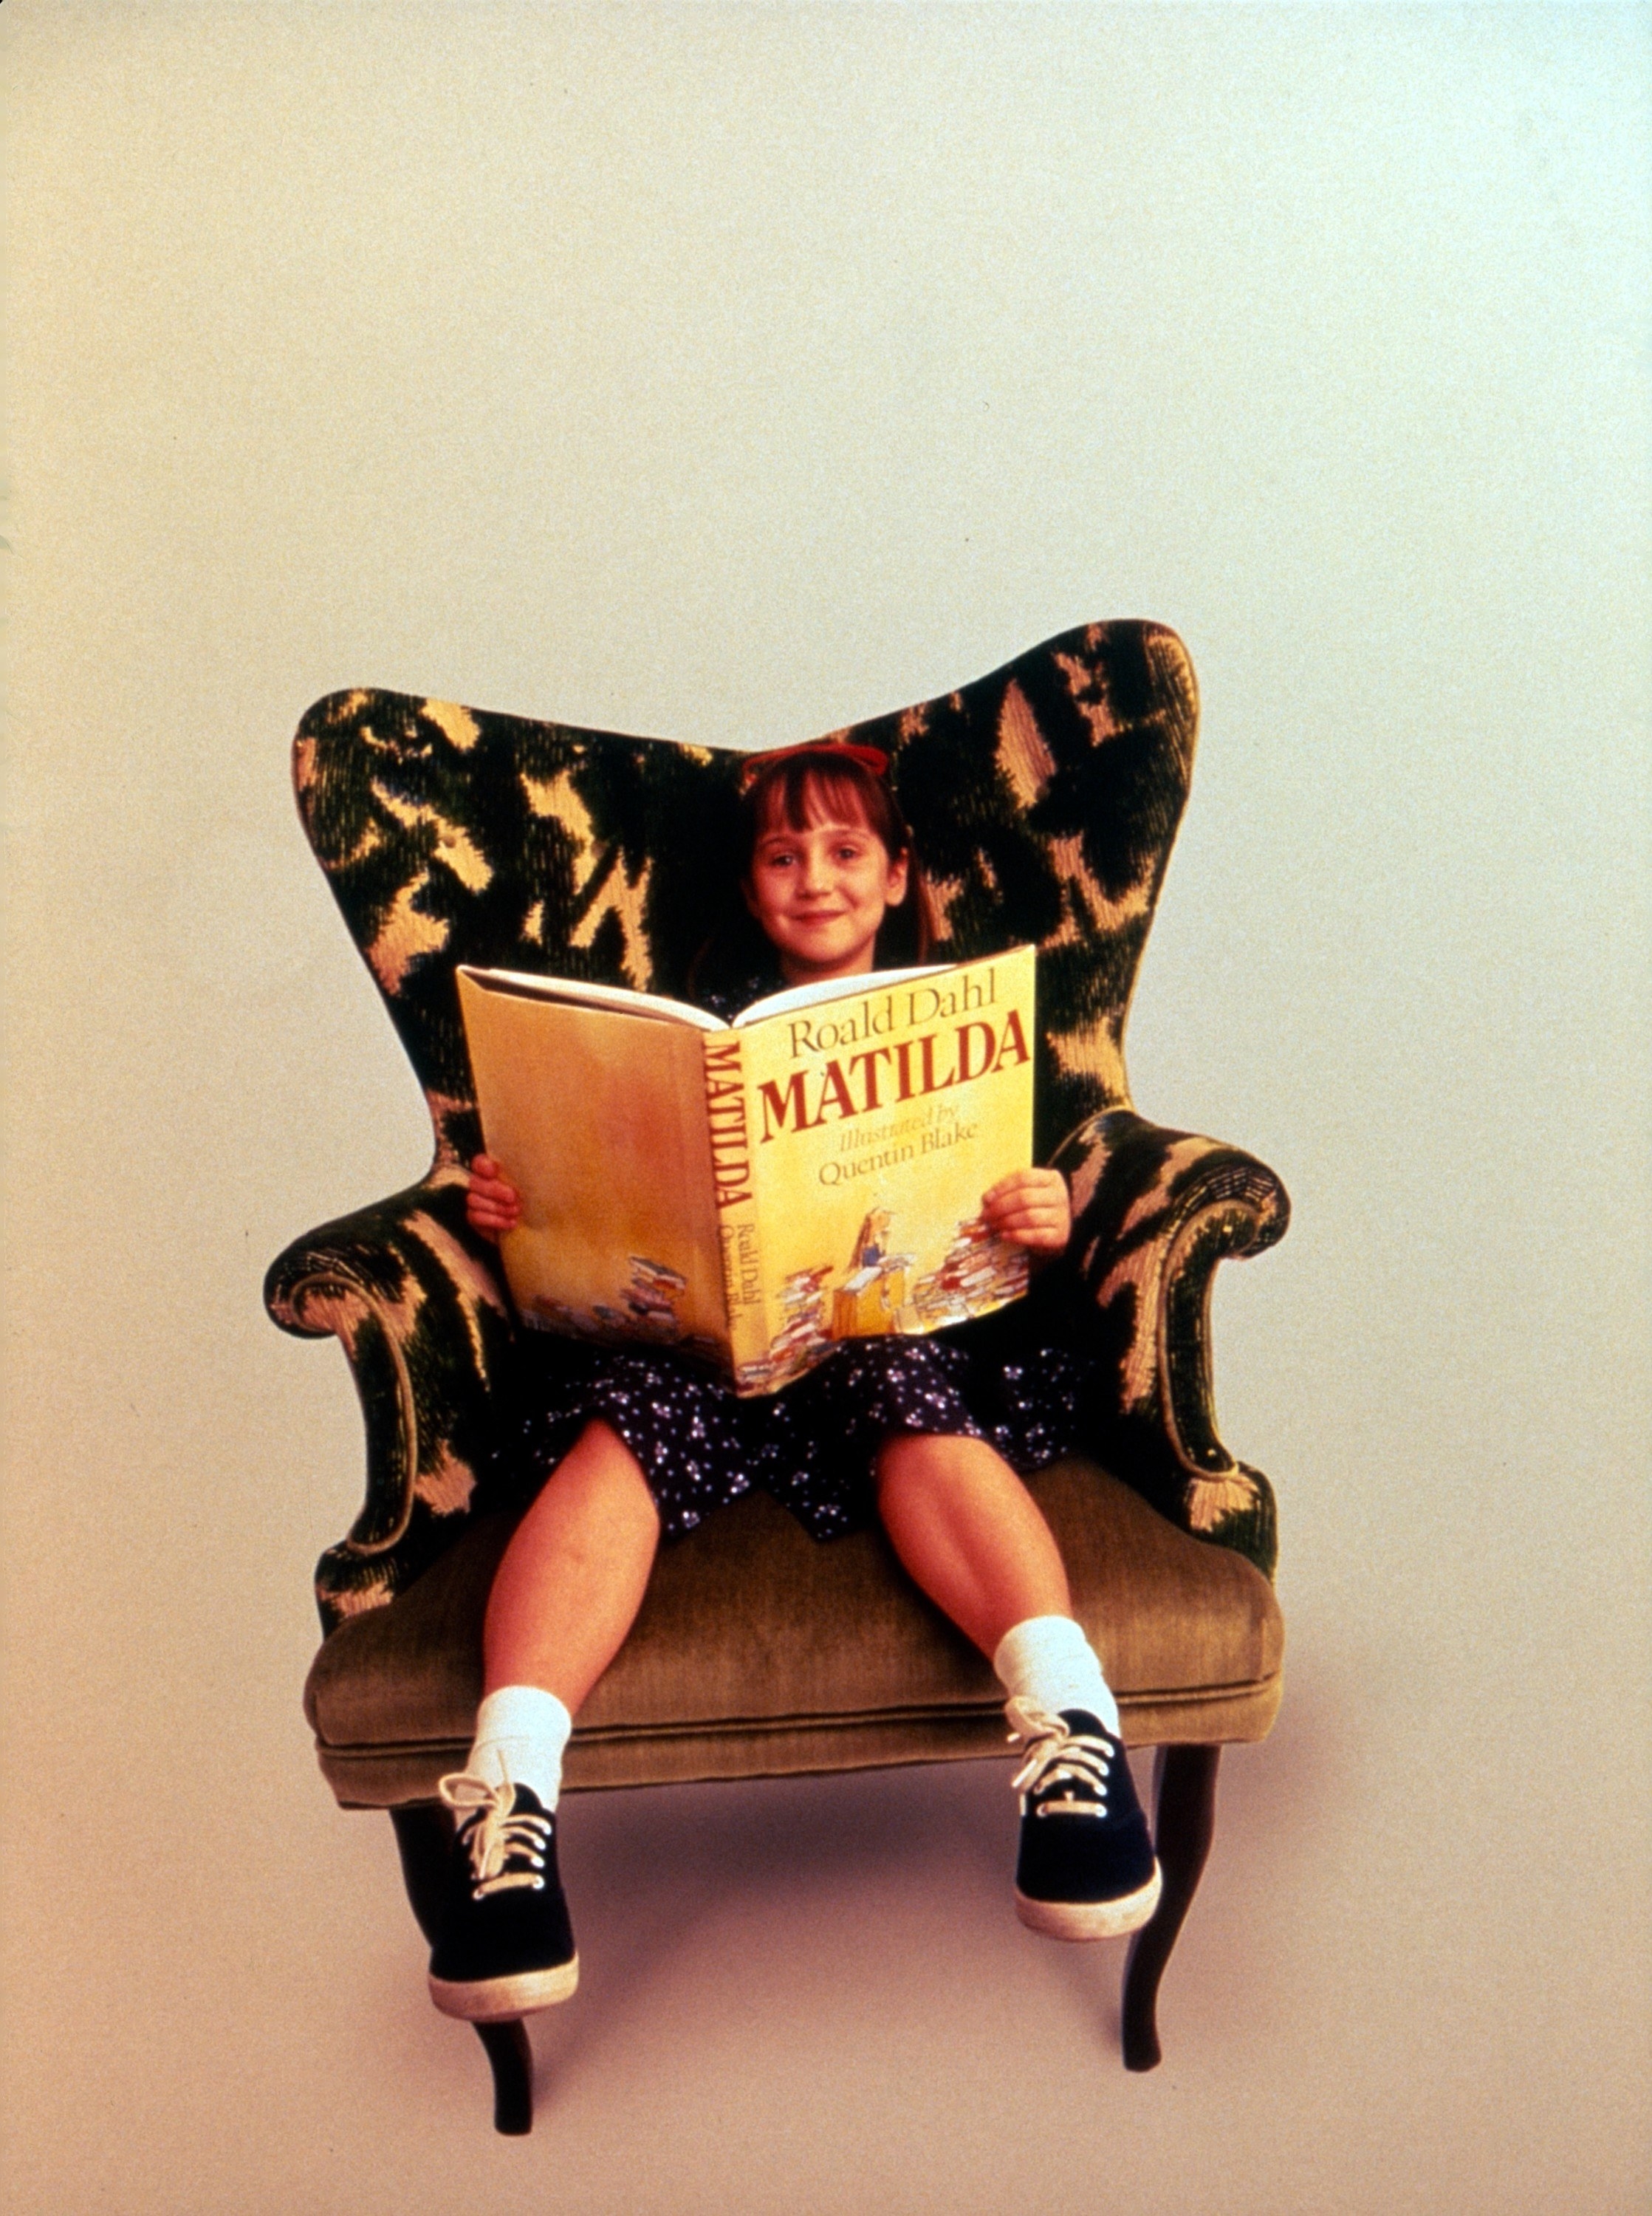 Mara sitting in a large chair while holding the book